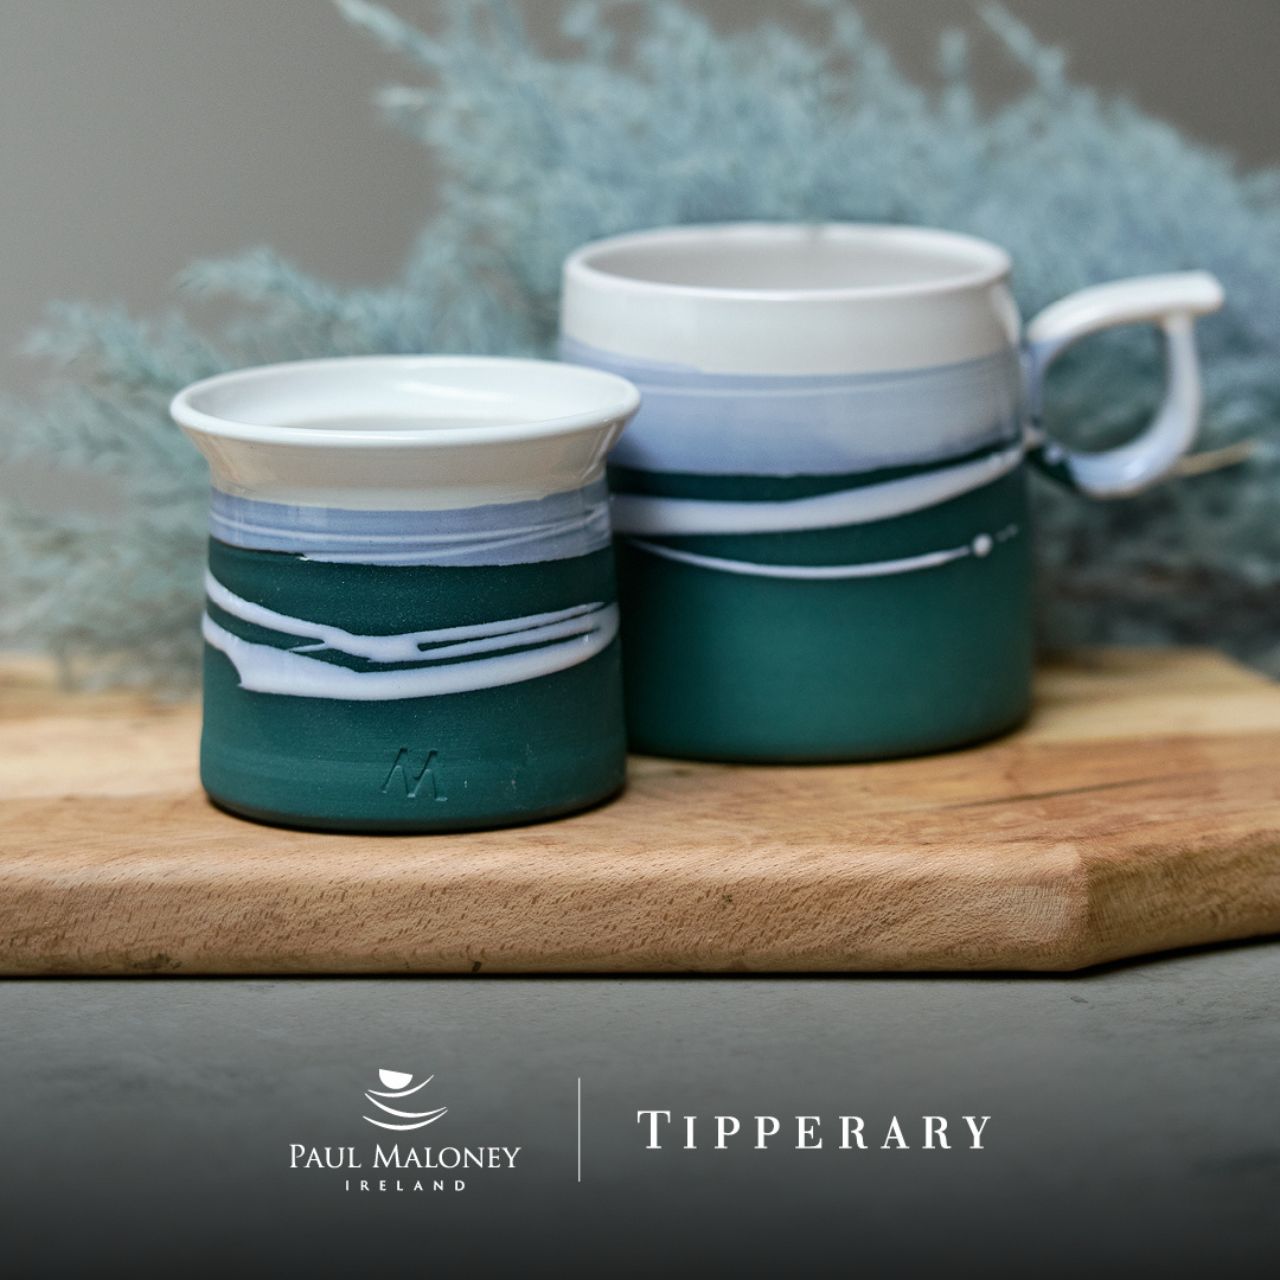 Tipperary Crystal Paul Maloney Pottery Teal Mug  This Paul Maloney Pottery Teal Mug is the perfect way to enjoy your favourite hot beverage. Crafted by renowned potter Paul Maloney, this mug is made of durable and long-lasting clay, with a glazed teal finish that is sure to impress. Ideal for all kinds of hot drinks, this mug is sure to bring elegance to your morning routine.